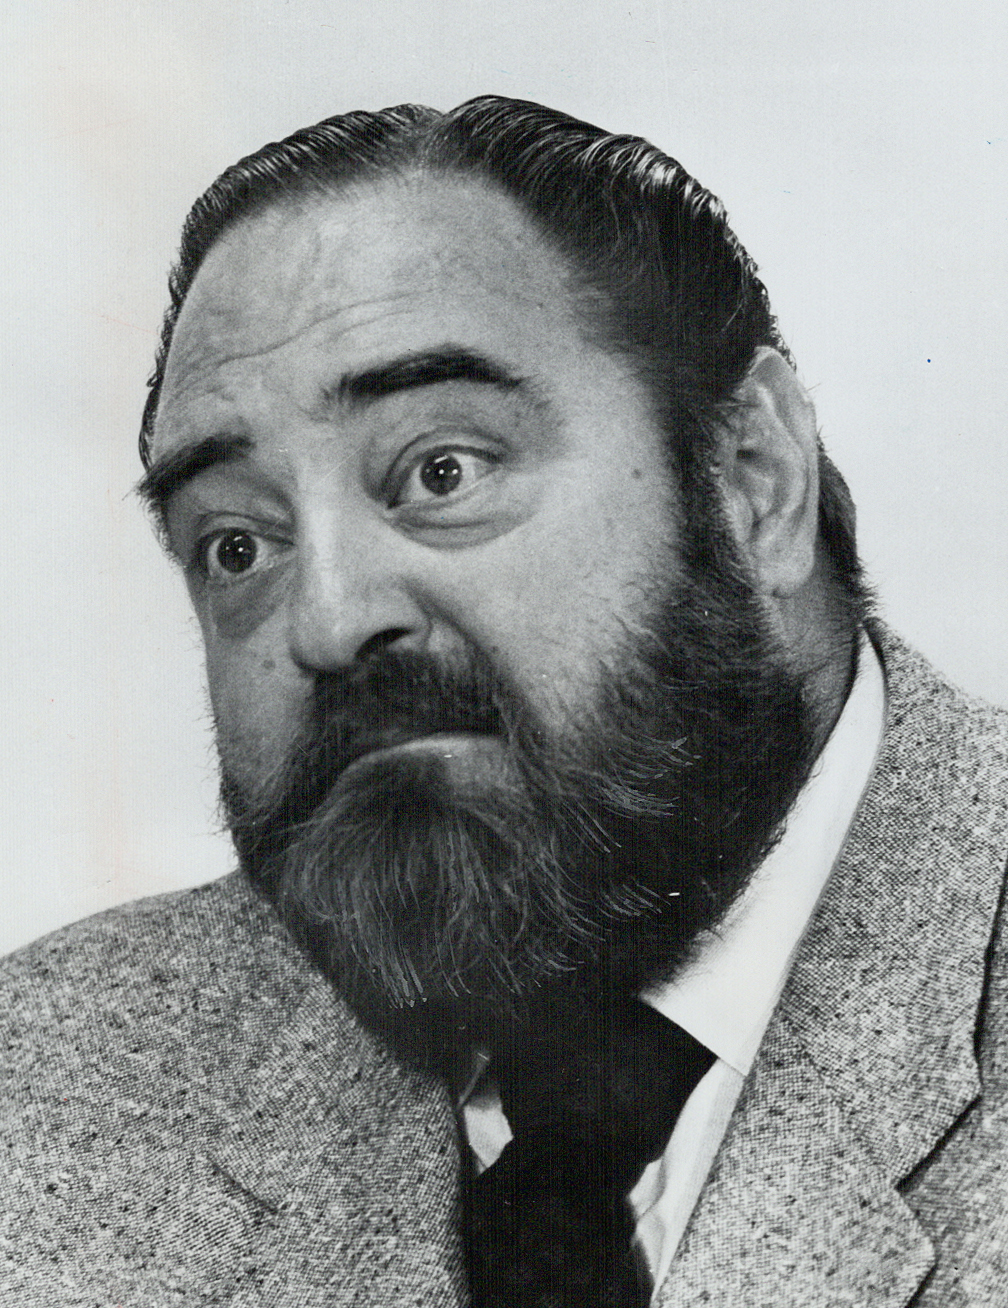 Actor Sebastian Cabot at the CBC-TV's Flashback show in 1965 | Source: Getty Images